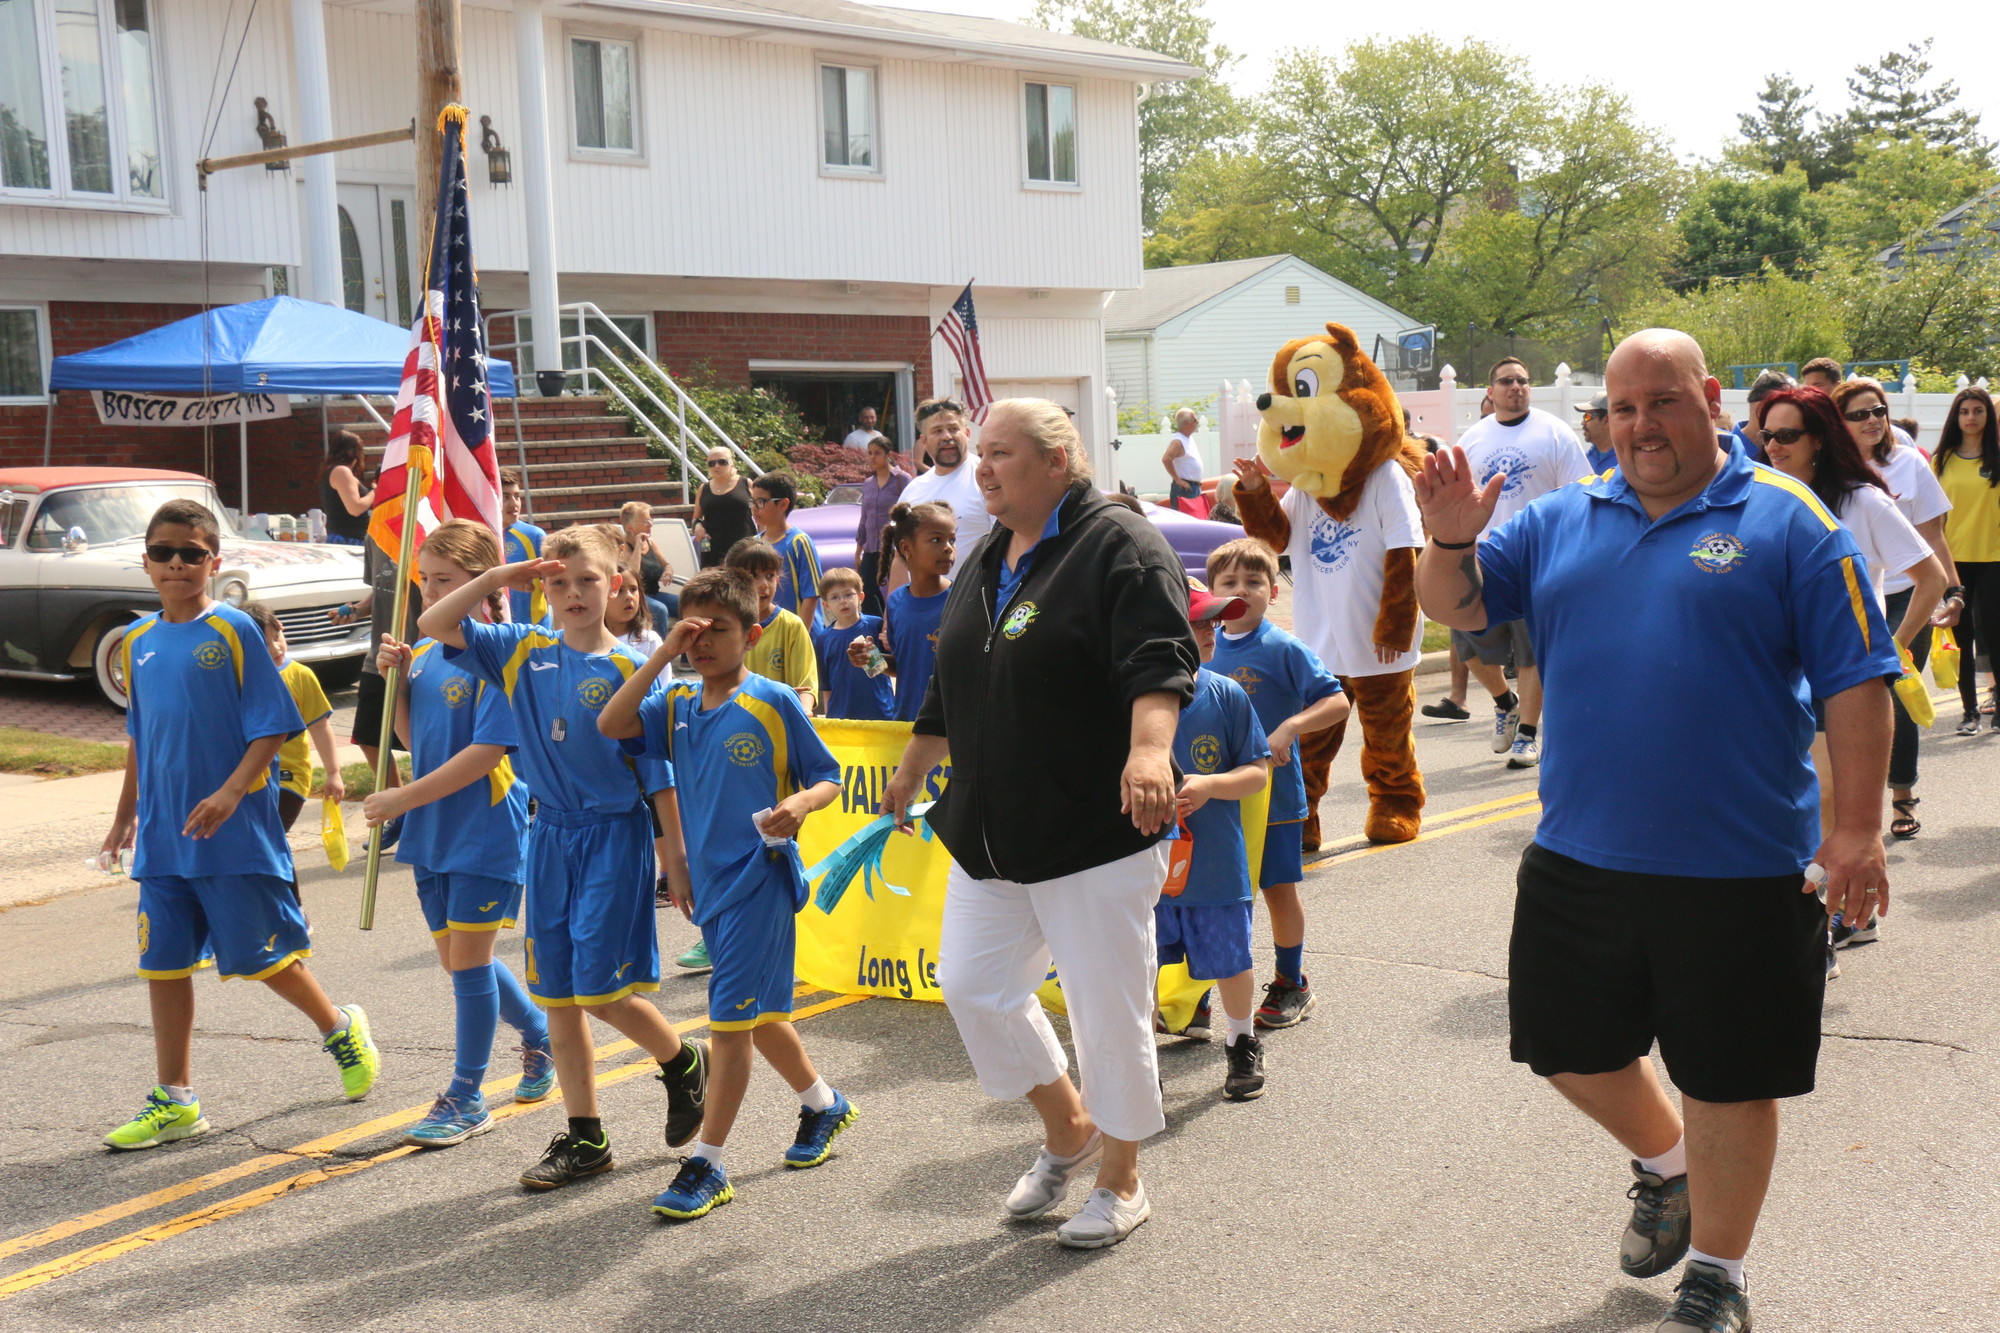 Valley Stream Soccer Club President Timothy Graham, right, and his wife, Jennifer, center, led the club in the parade.